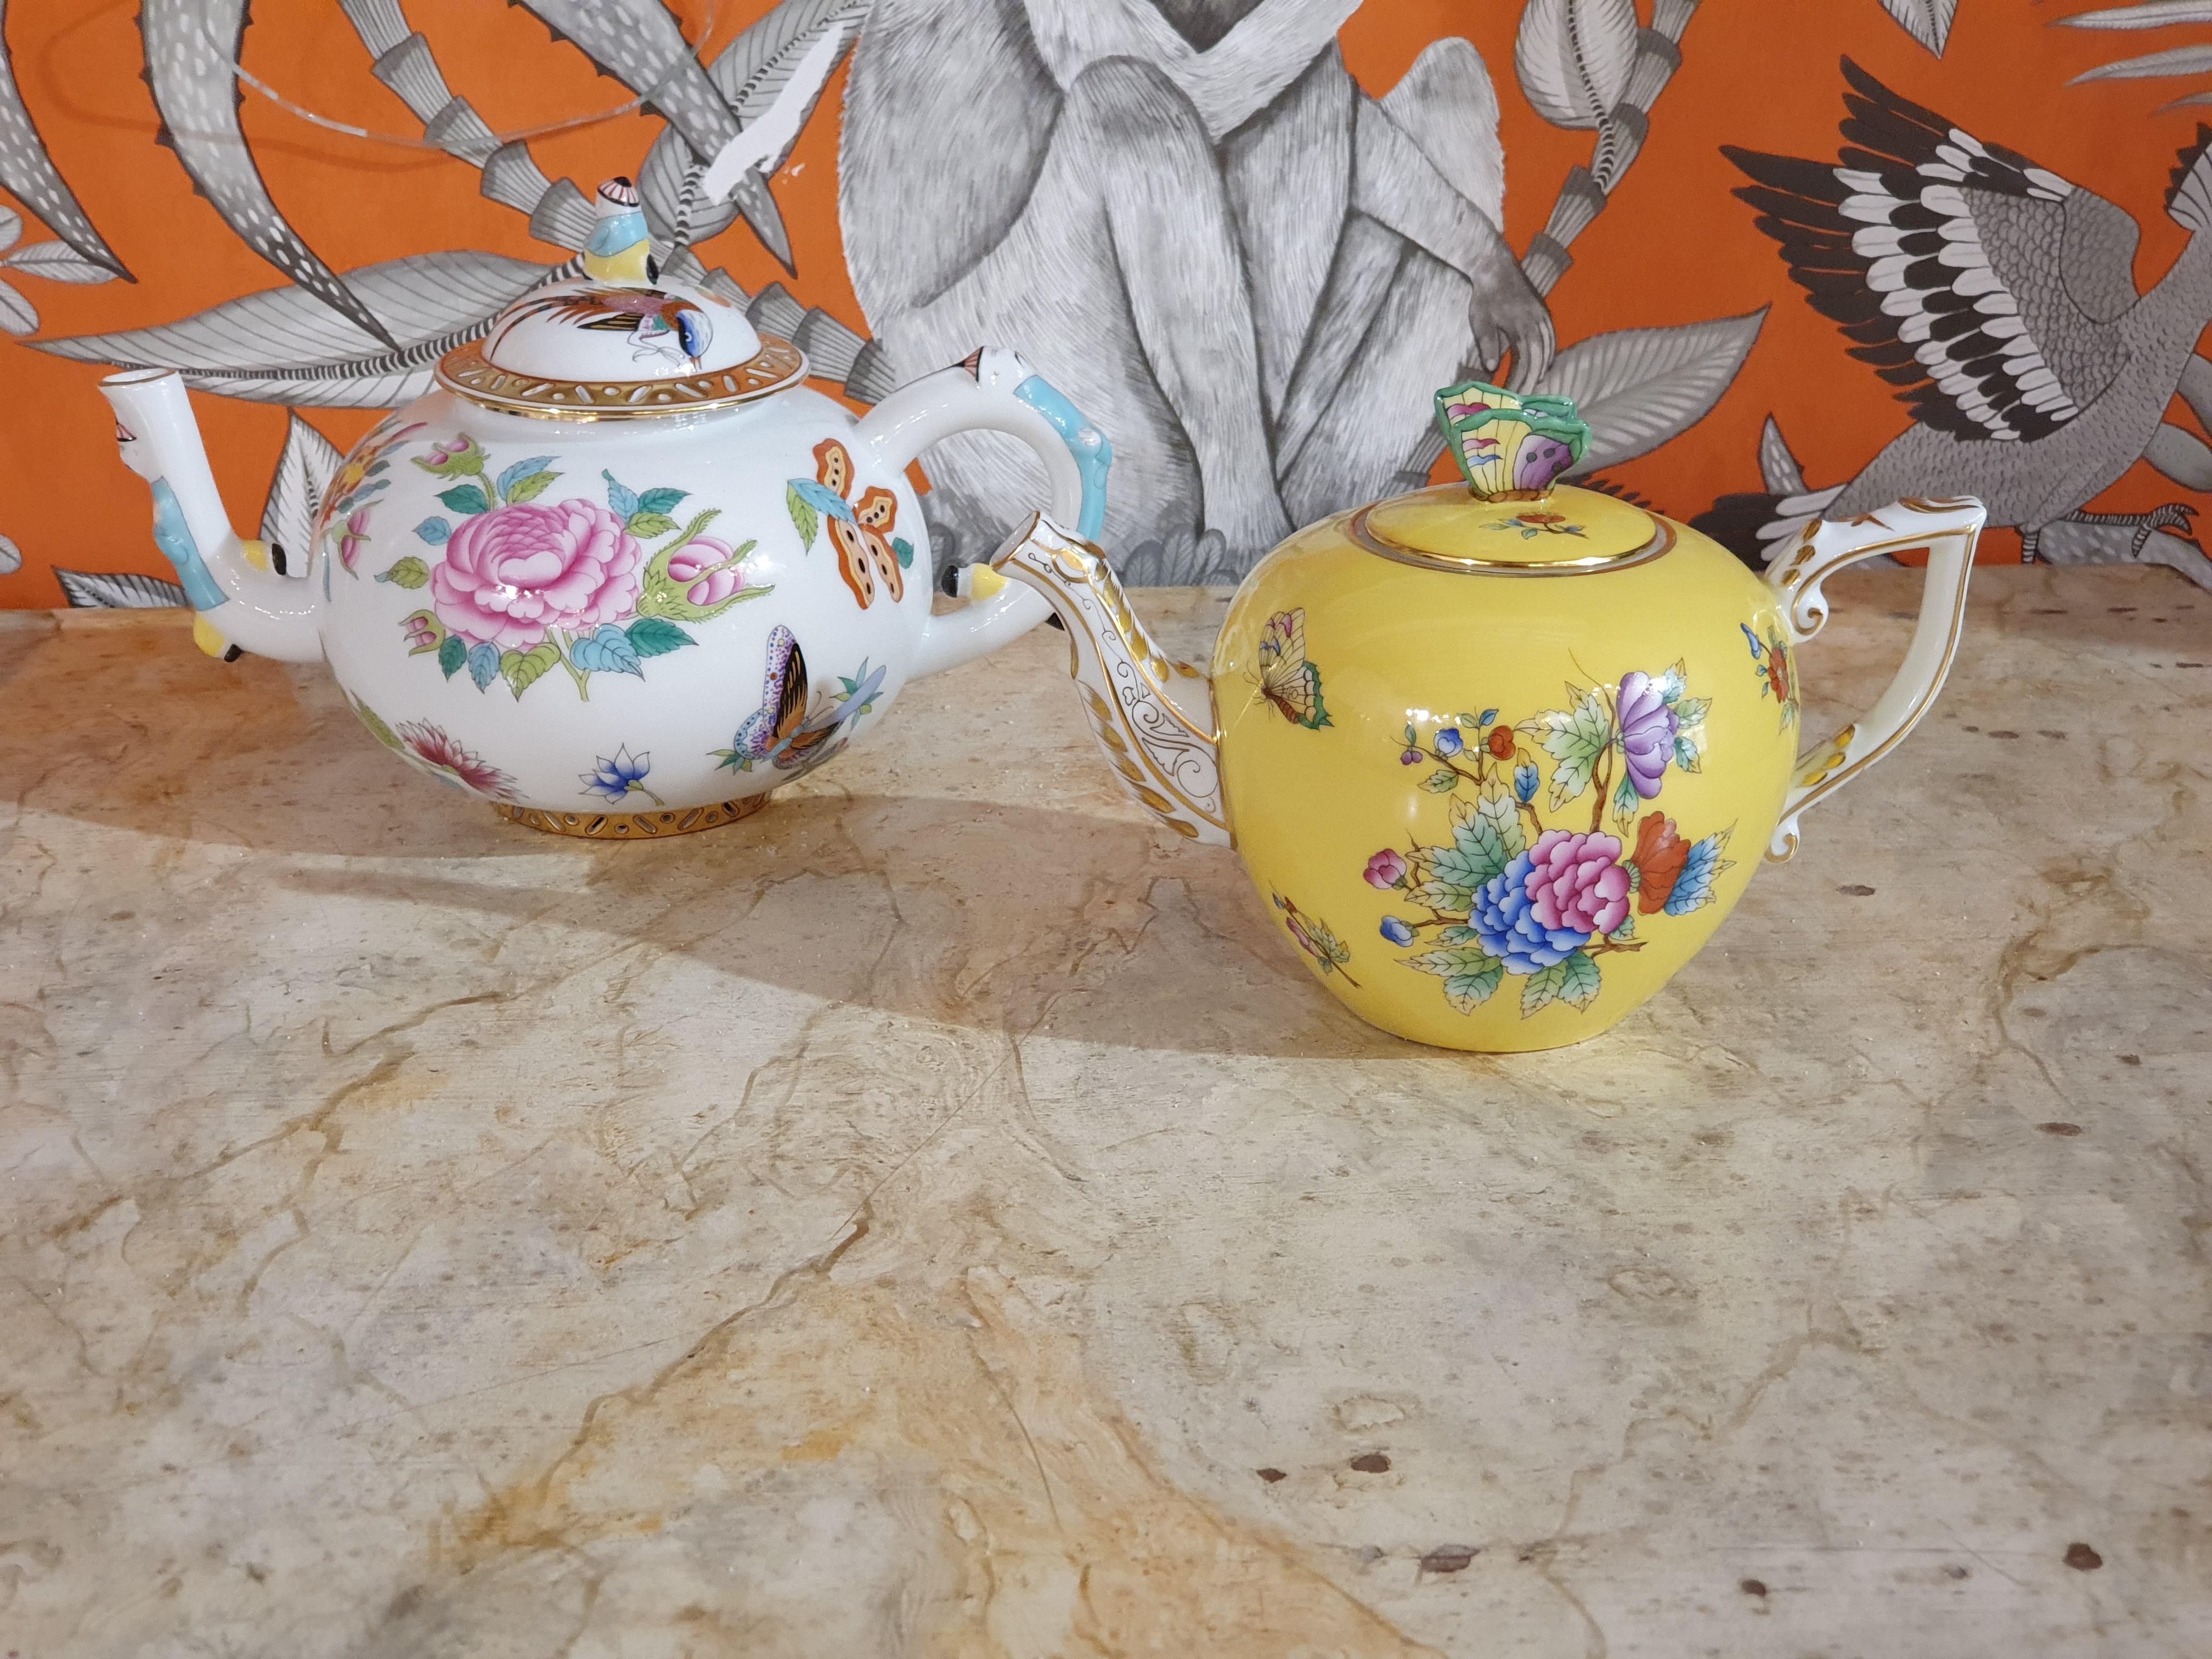 The first is hand painted by master decorator Erzsebet Rakoczy.
The splendid oriental painterly decor with flowers, birds and butterflies is perfectly combined with the Classic Esterházy shape, note the lace-like fretworks on porcelain at the base